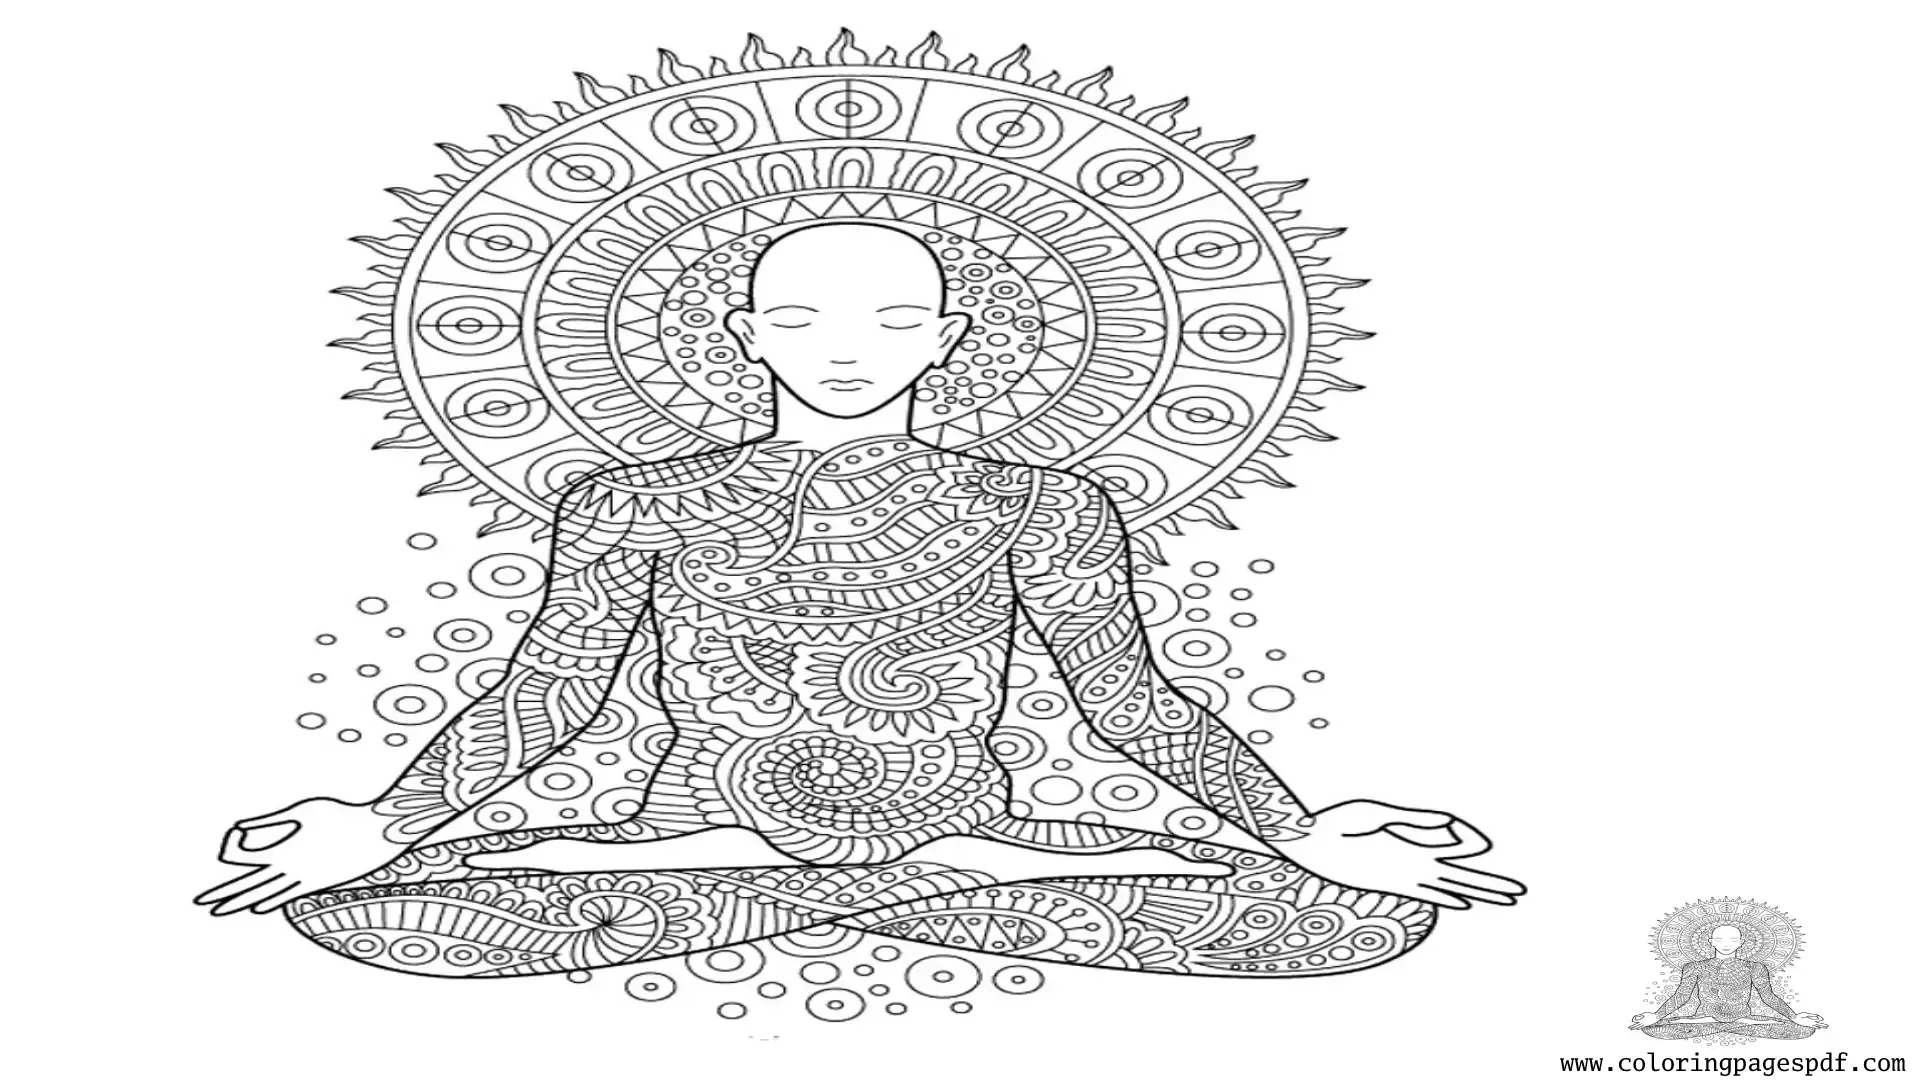 Coloring Pages Of A Male Person Meditating Mandala